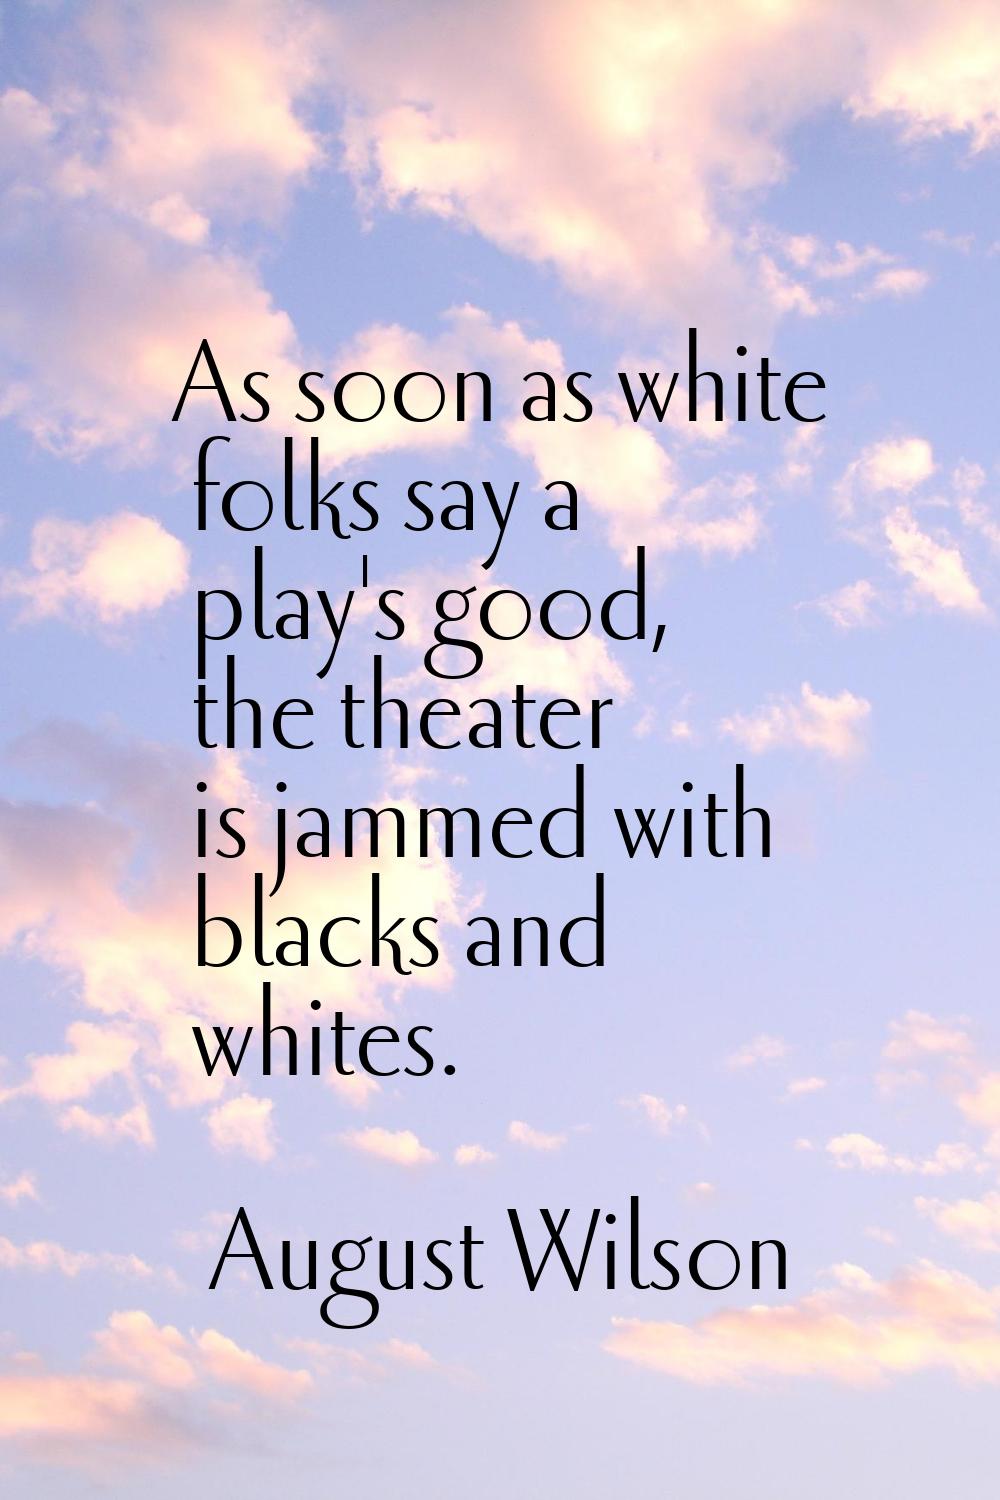 As soon as white folks say a play's good, the theater is jammed with blacks and whites.